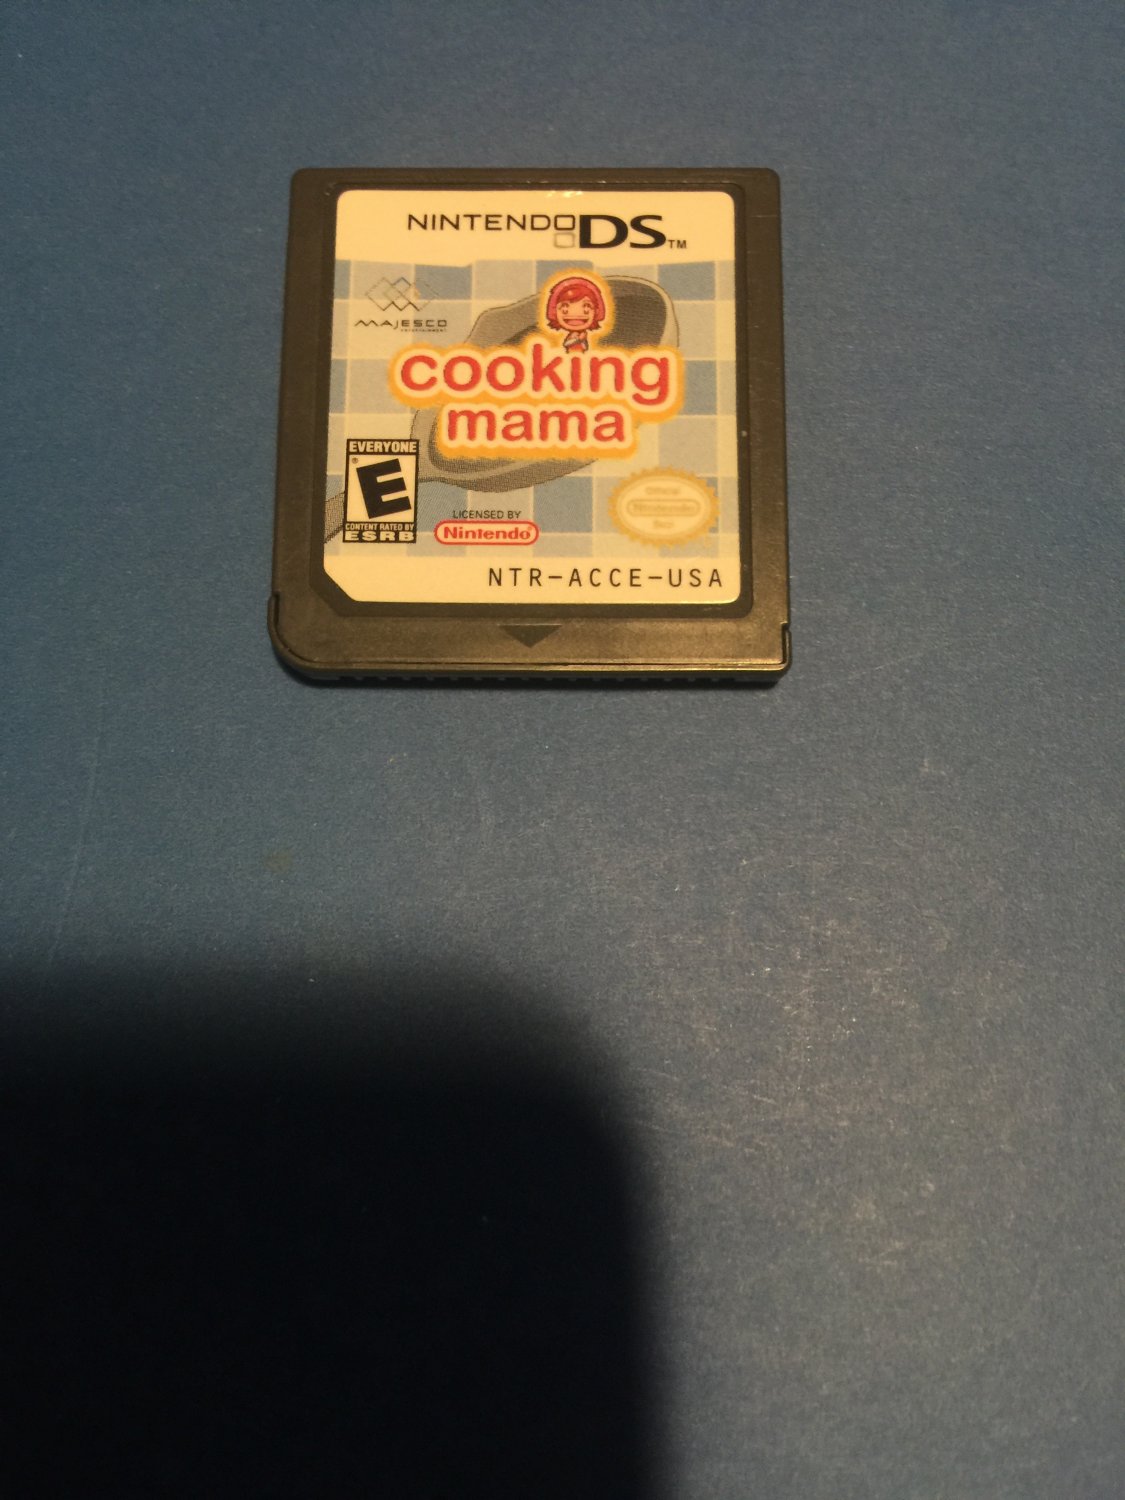 Nintendo DS Cooking mama